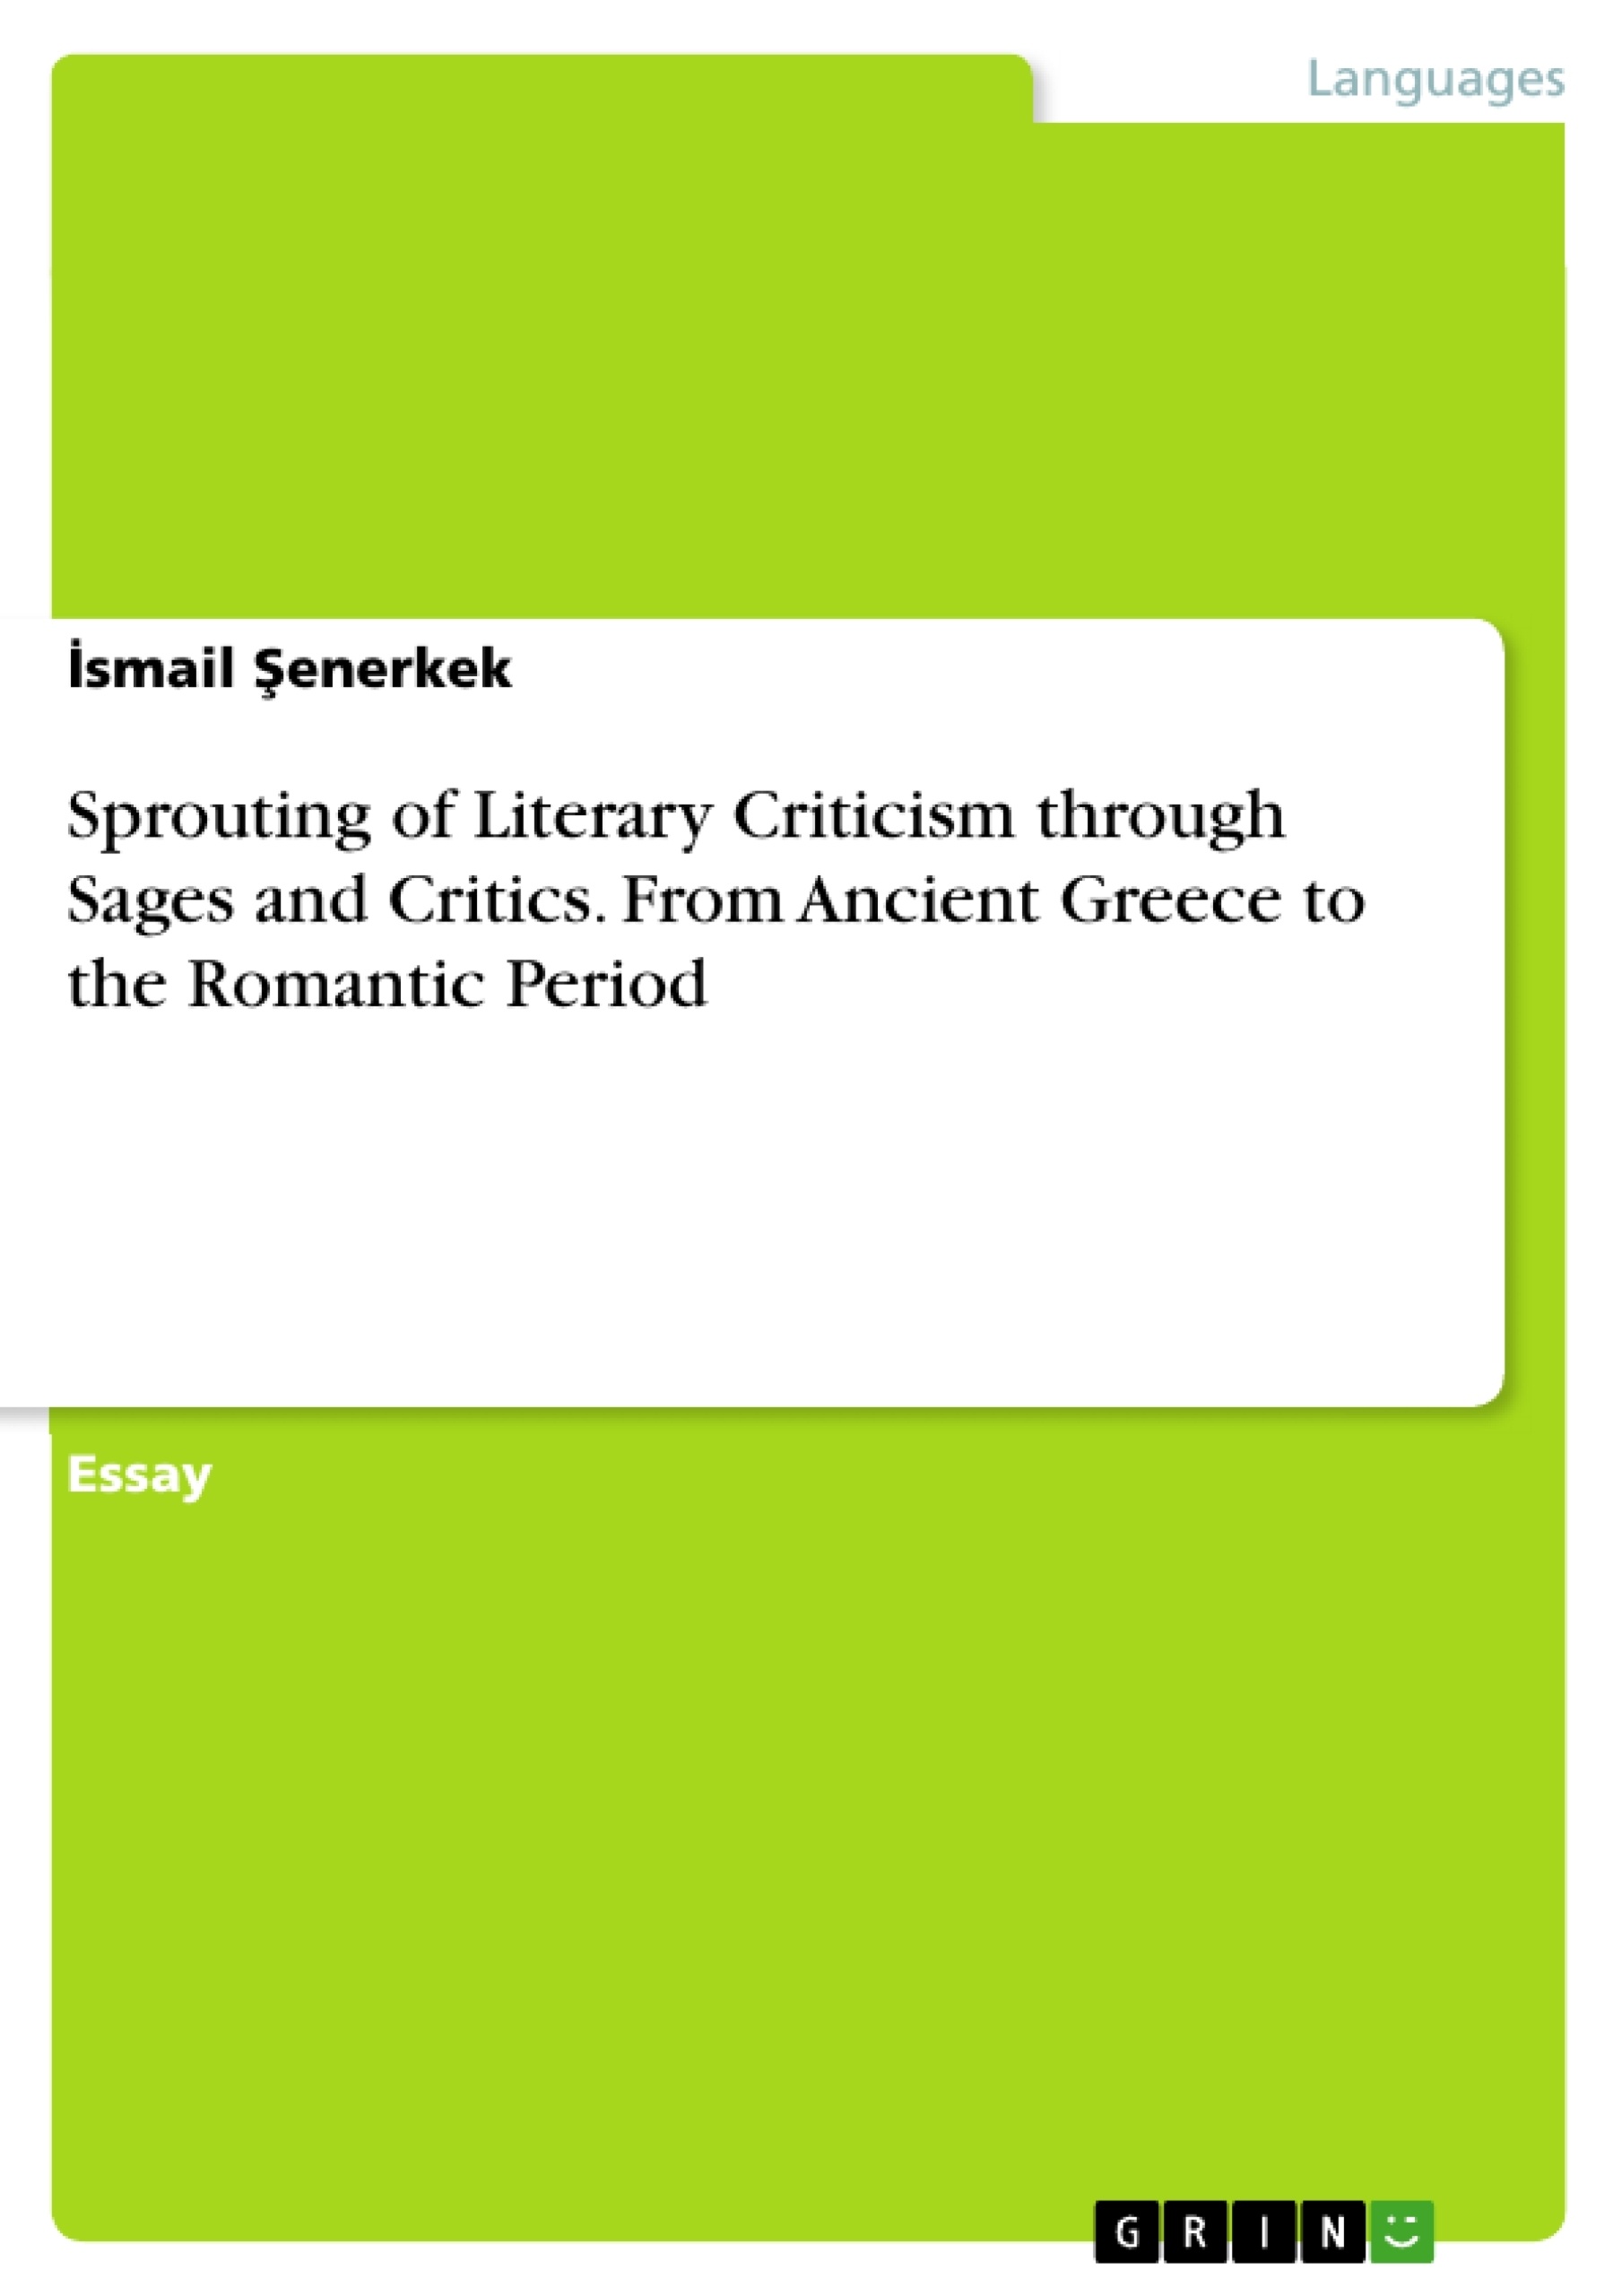 Titre: Sprouting of Literary Criticism through Sages and Critics. From Ancient Greece to the Romantic Period